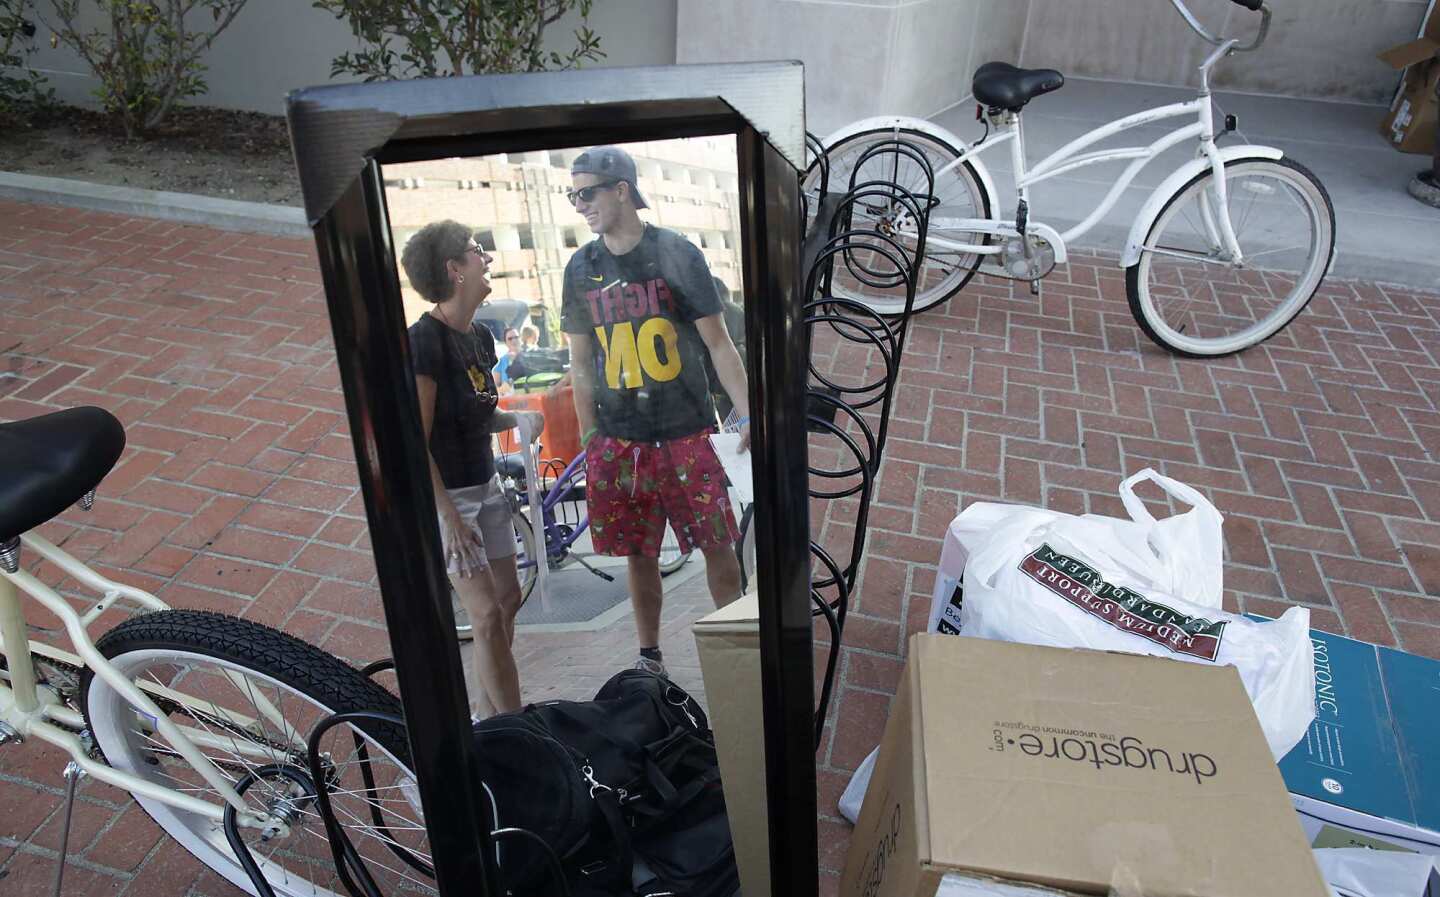 USC freshman Jack Martin, right, gets help from his mother, Karen Martin, as he unloads his belongings at a campus dorm.